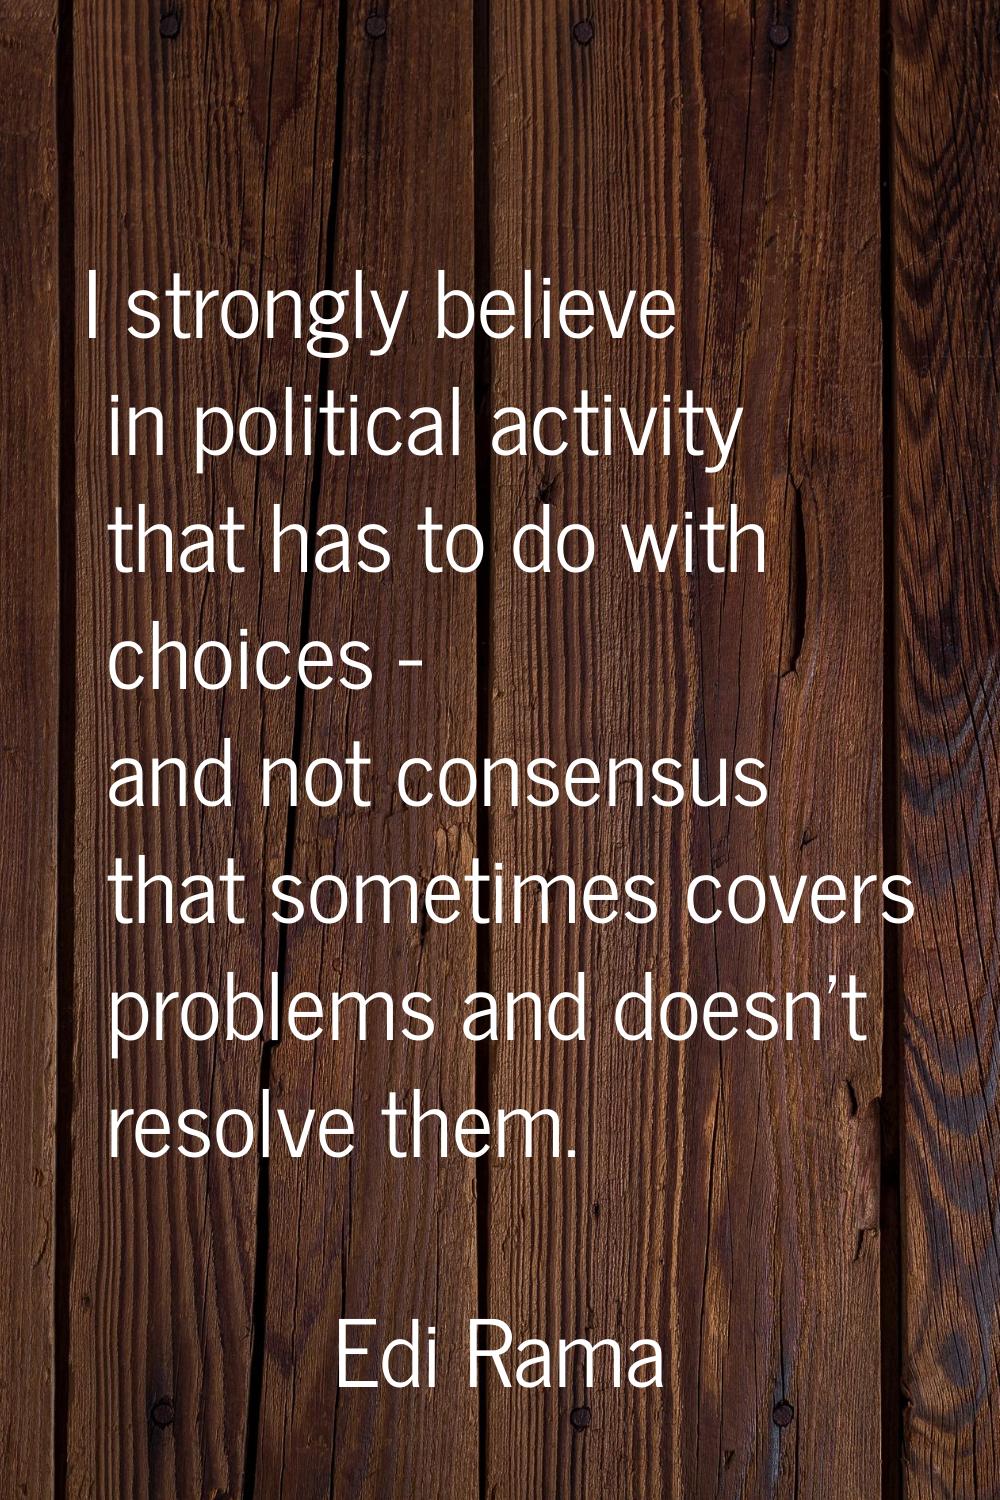 I strongly believe in political activity that has to do with choices - and not consensus that somet